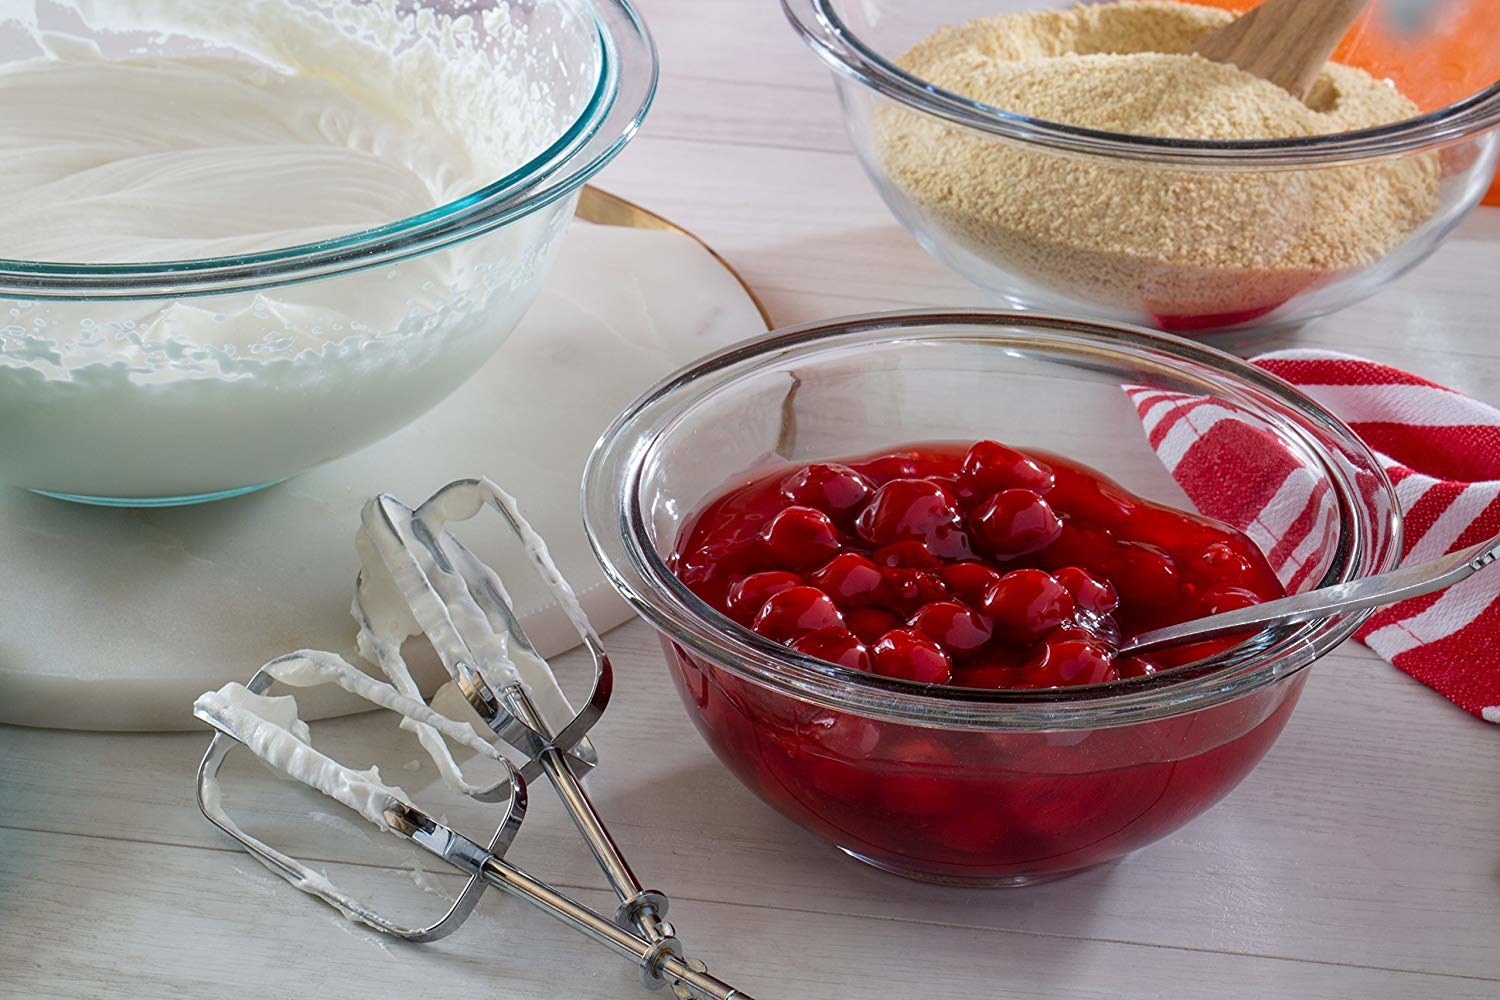 Bowls with whipped cream, cherries, and breadcrumbs, and a hand mixer on a table, ingredients for a dessert recipe